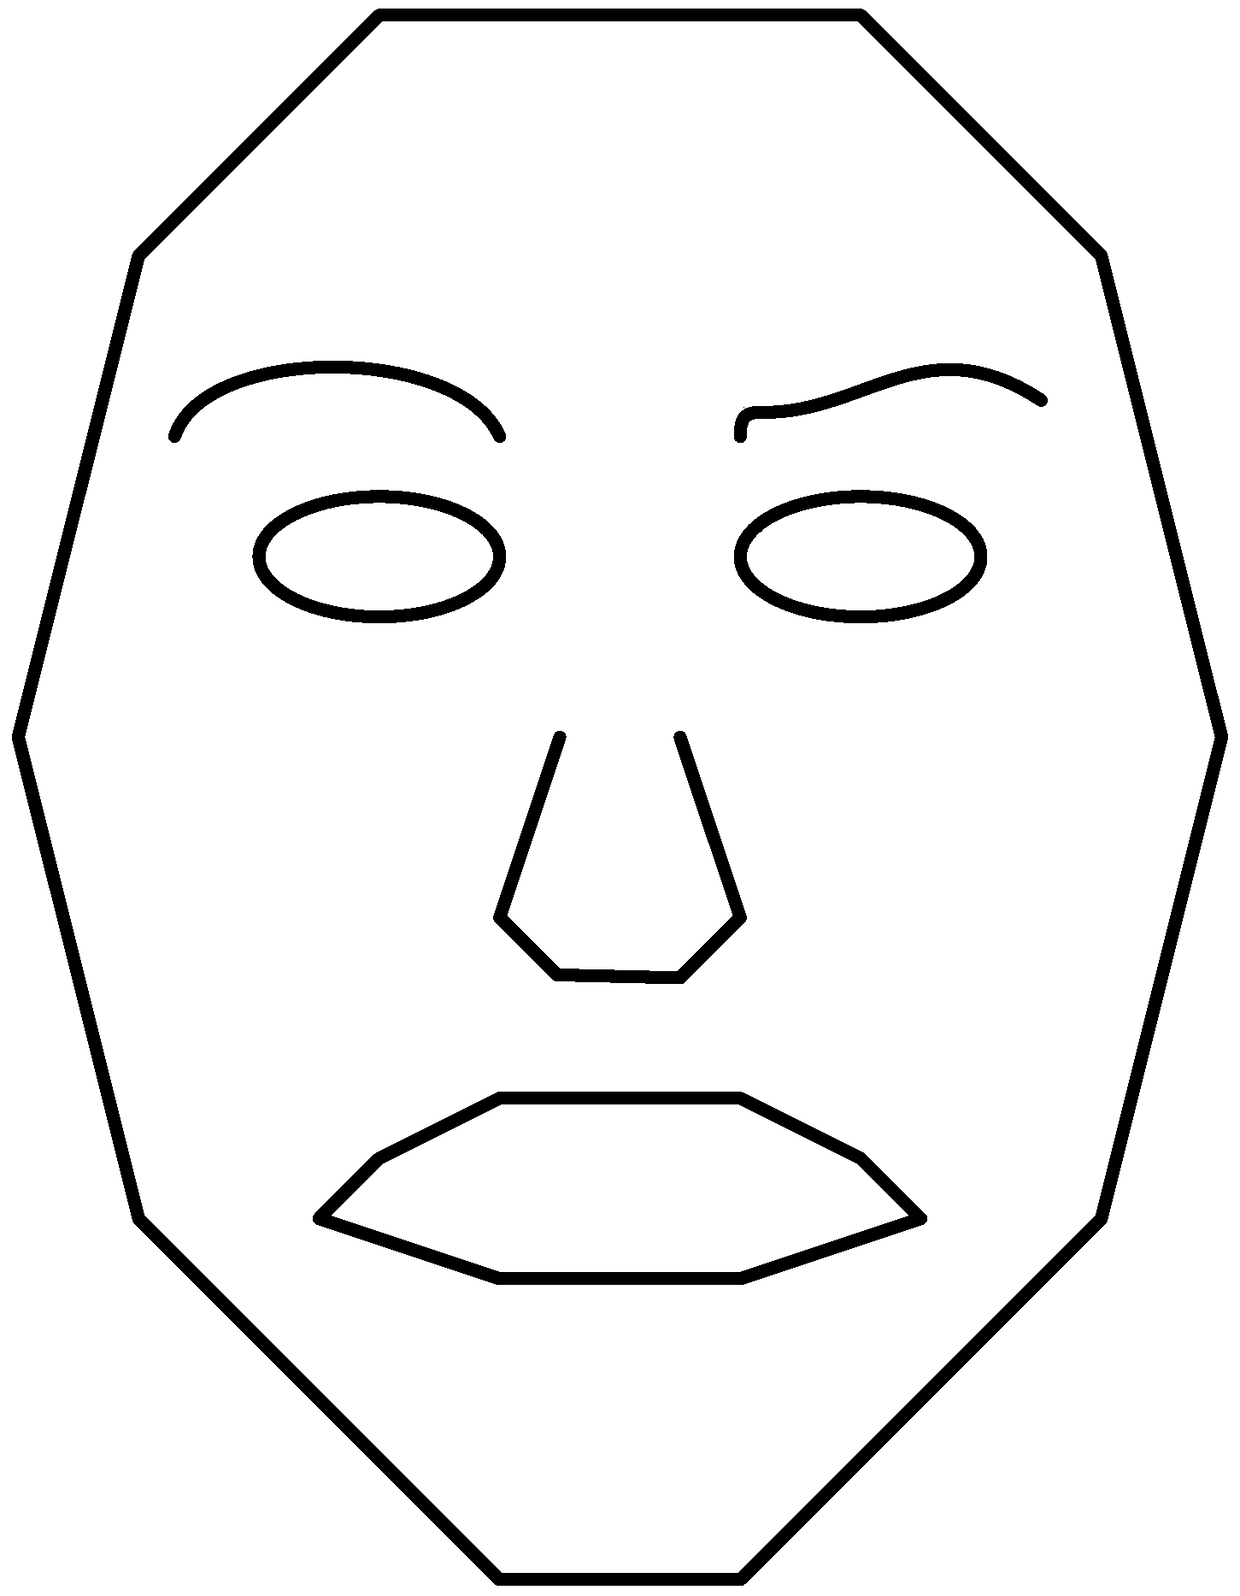 A method and device for face comparison and a method and system for face recognition